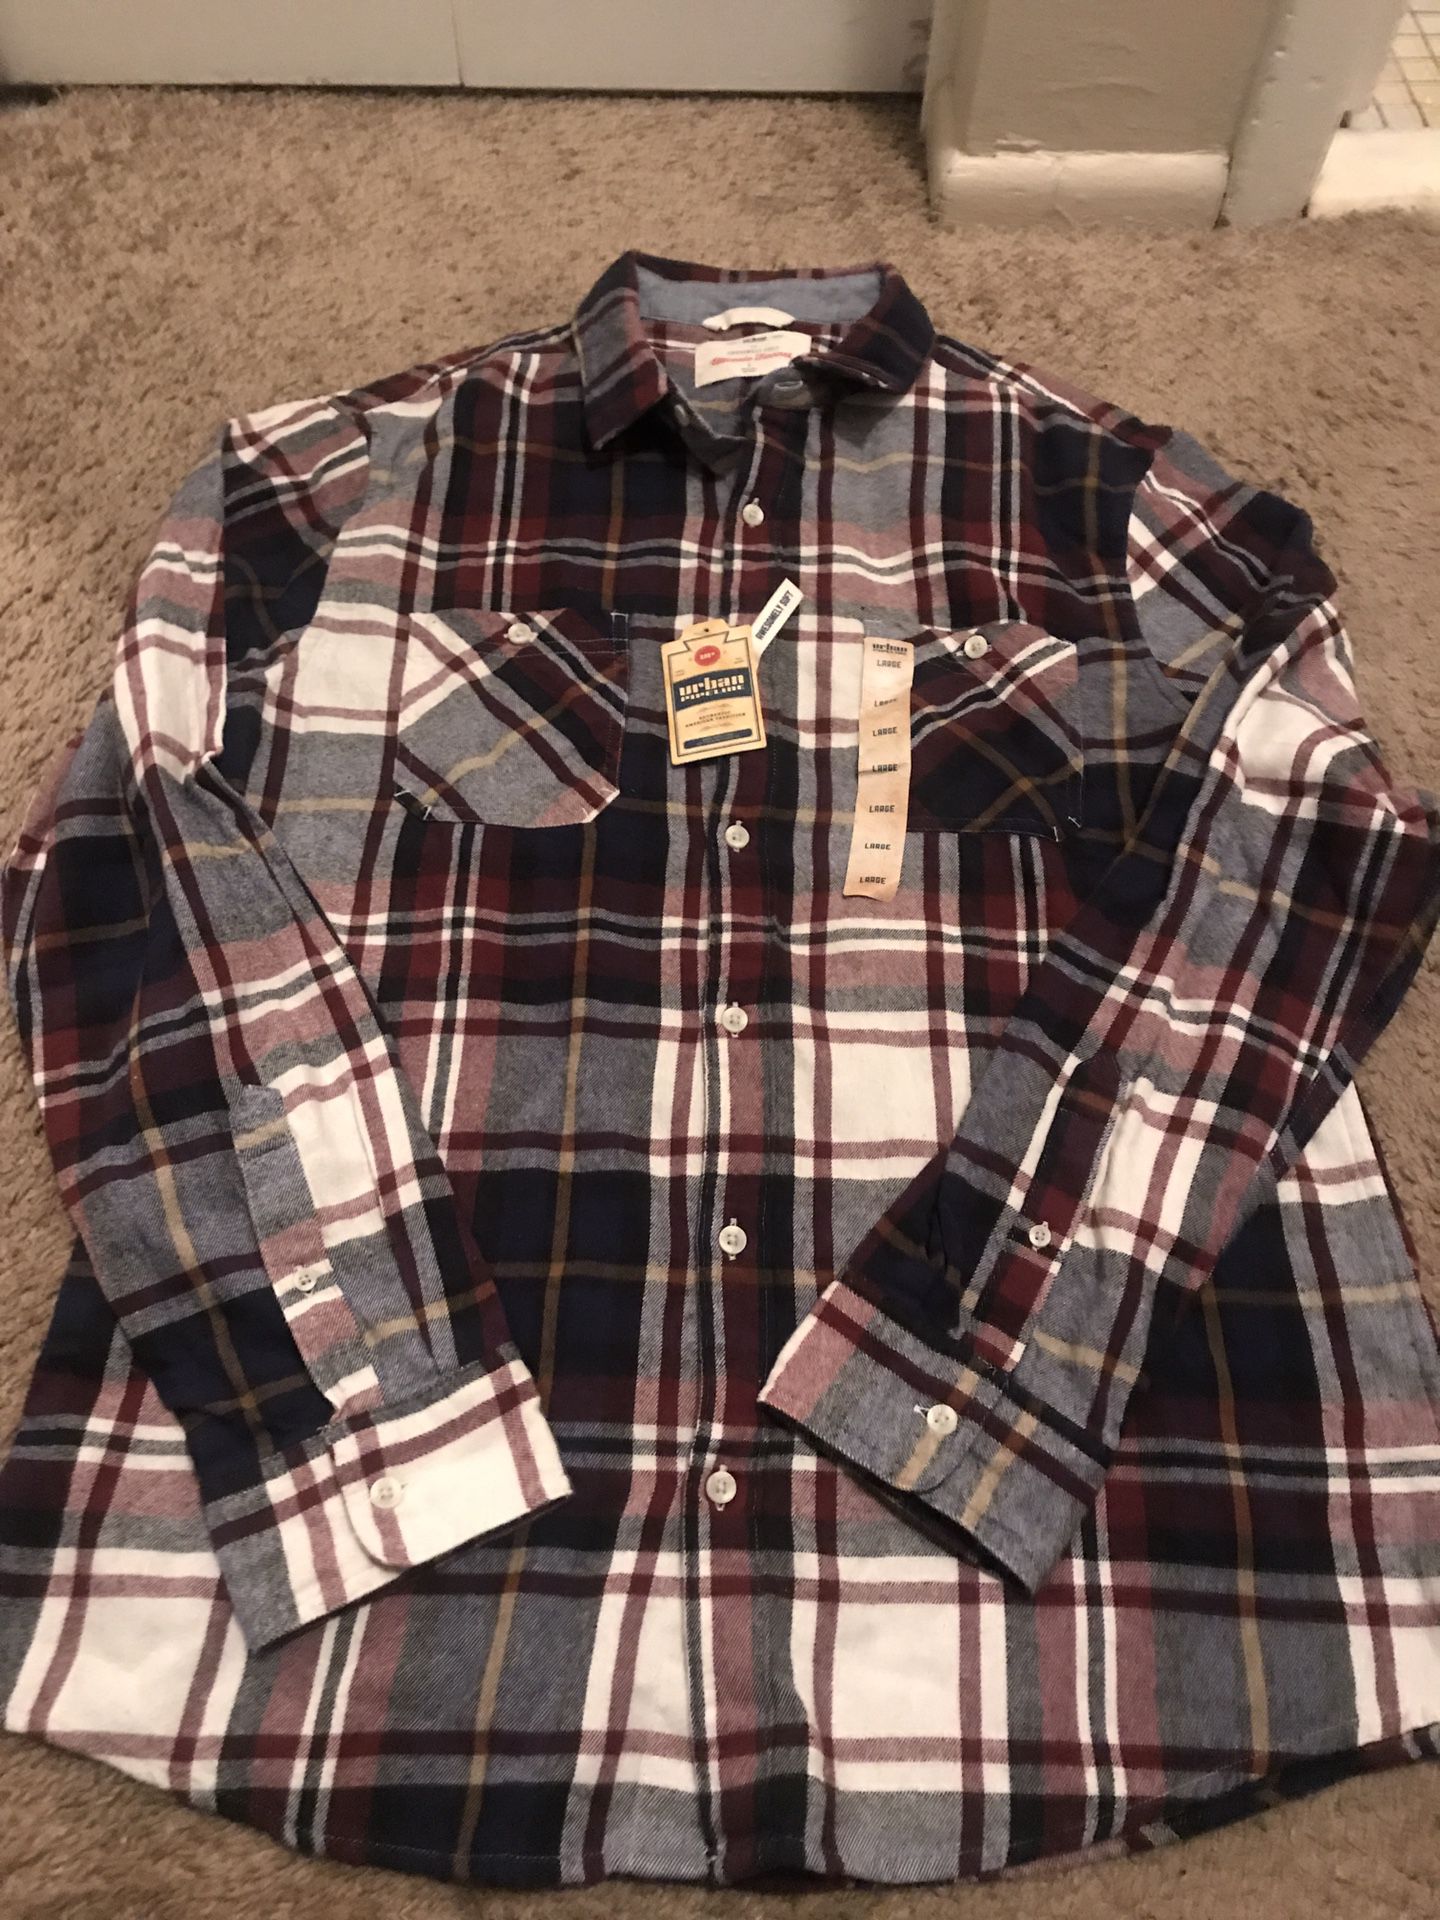 Long sleeve button down